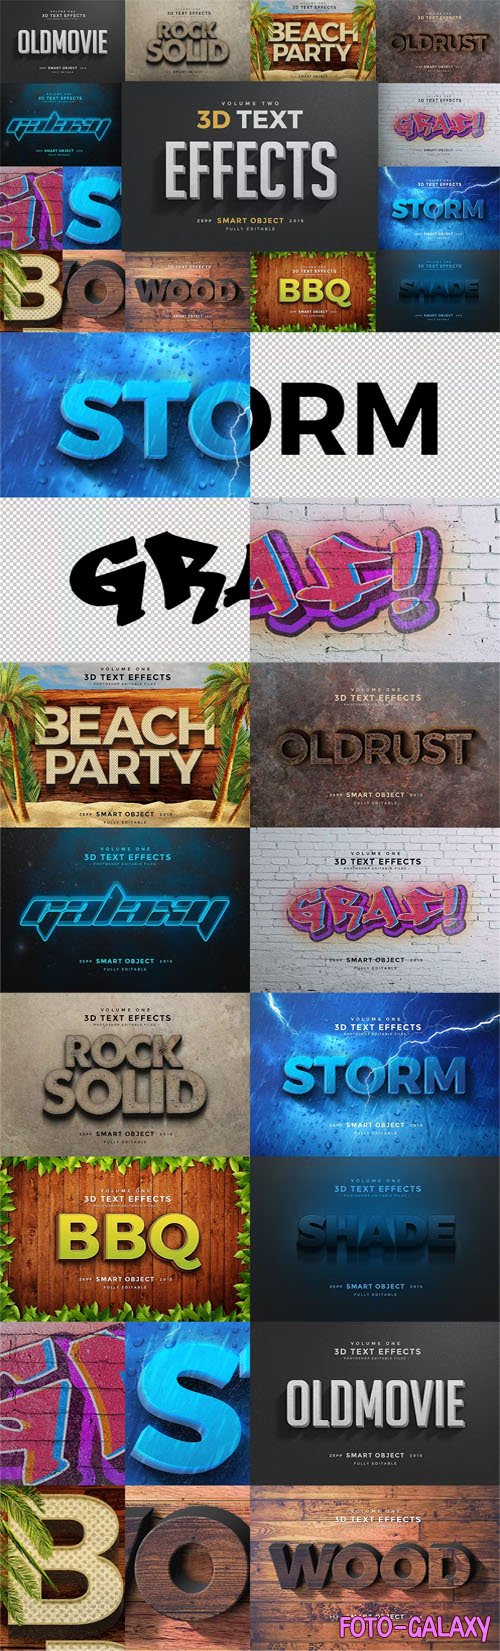 3D Text Effects [Vol.2] for Photoshop